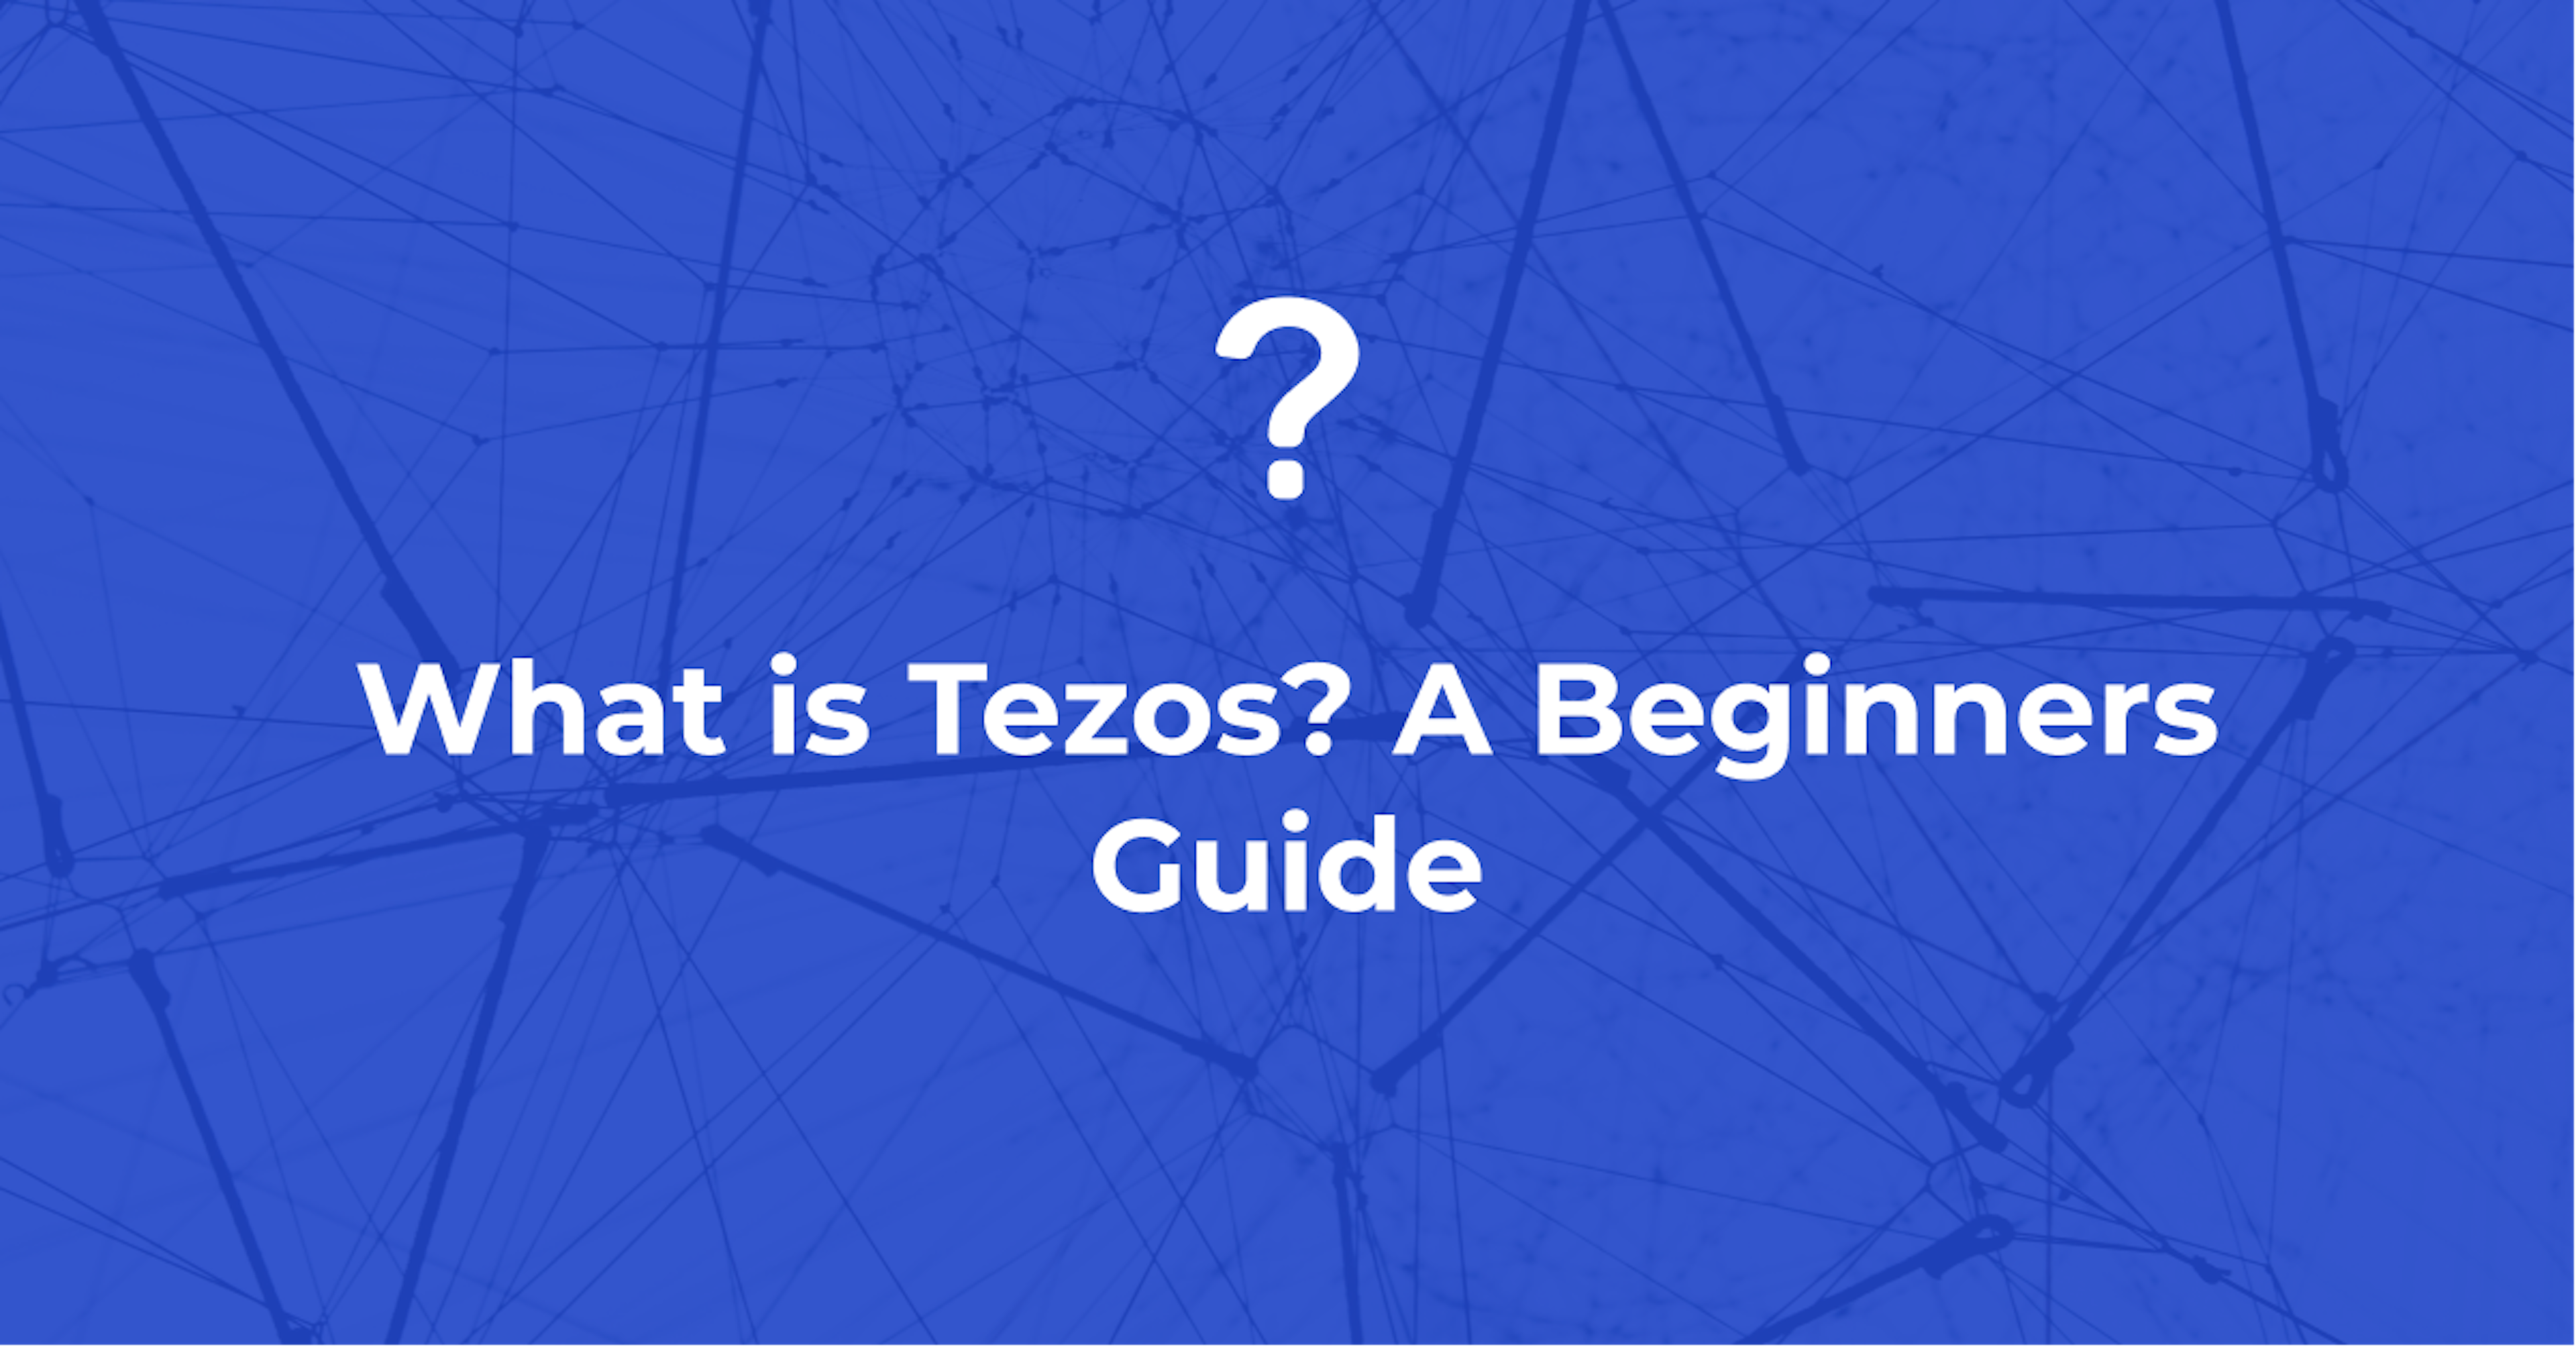 What is Tezos? A Beginners Guide